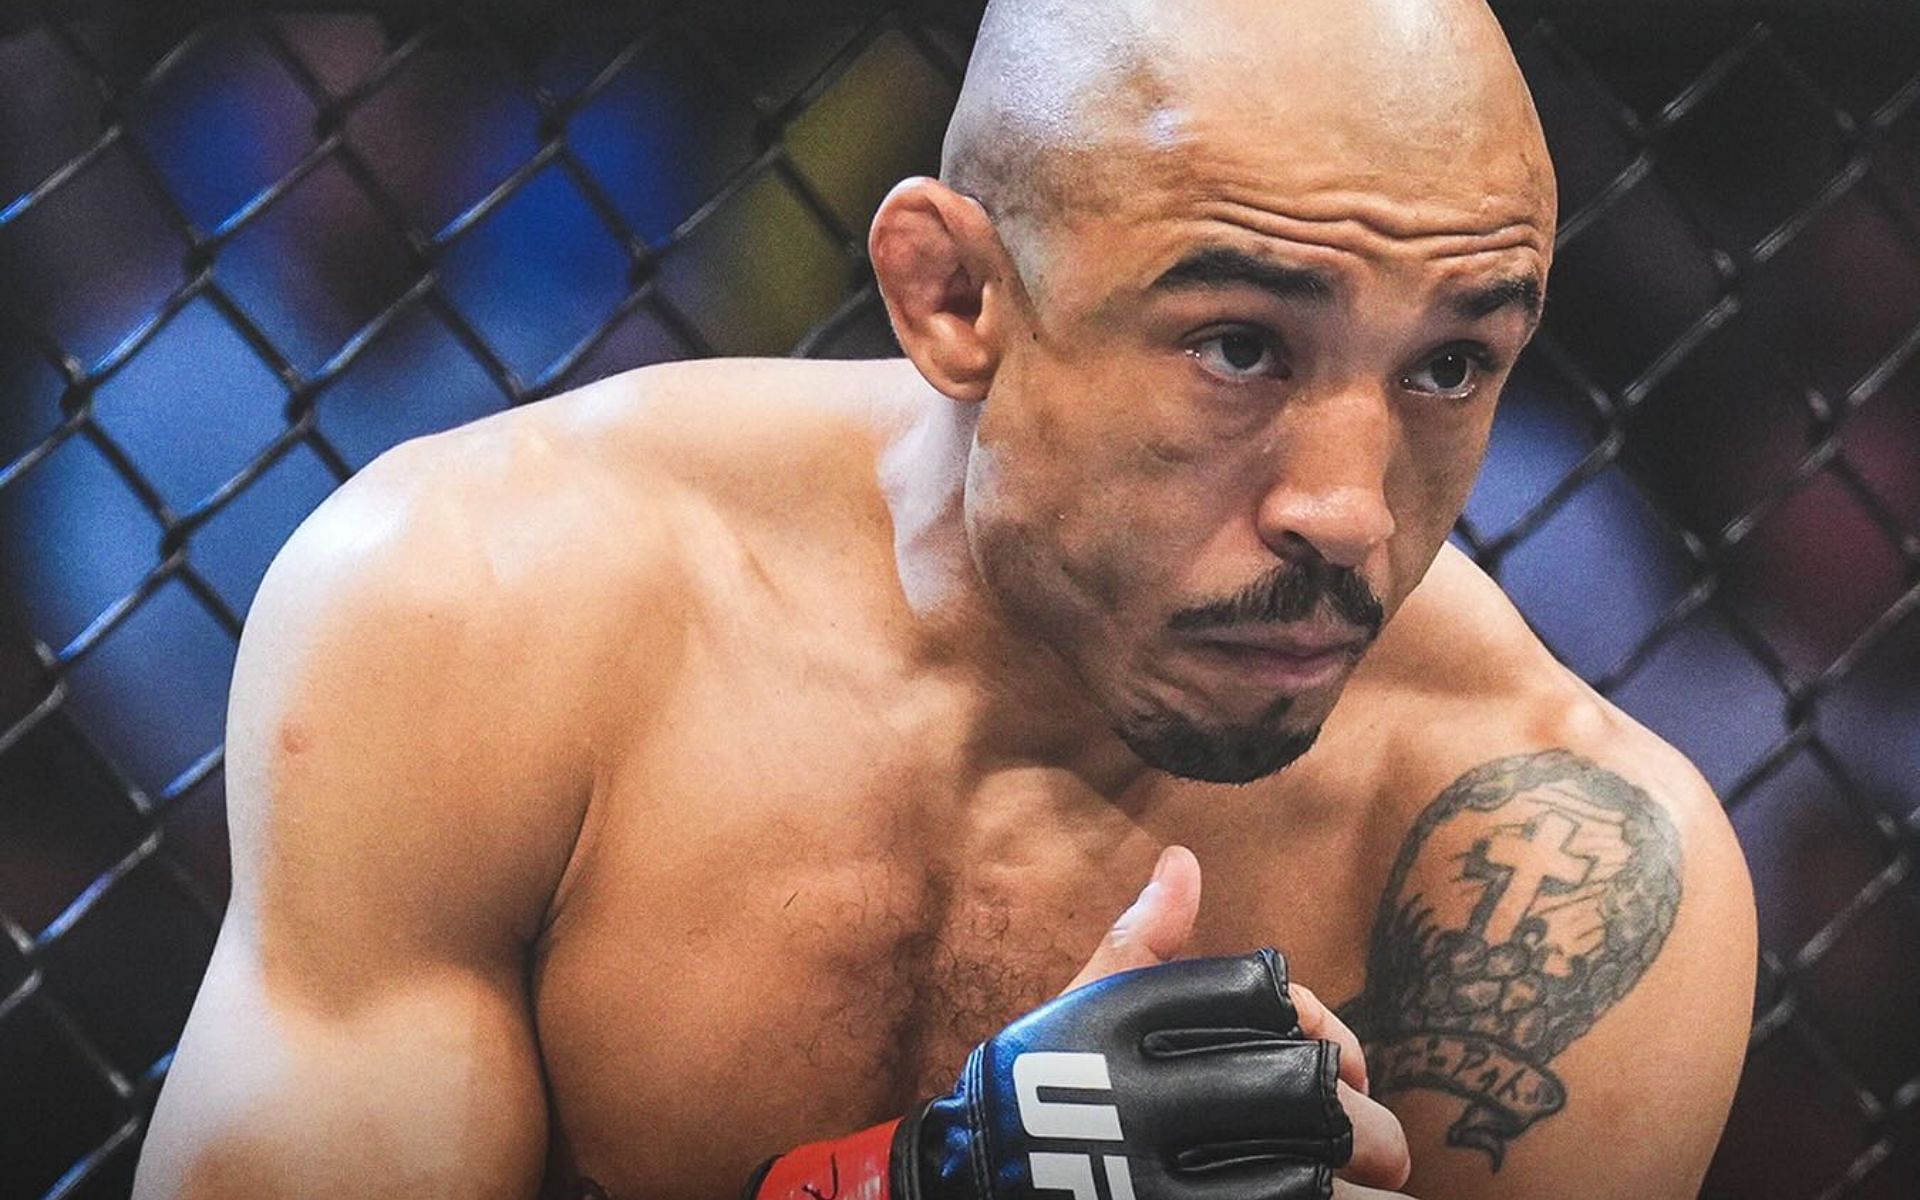 The legendary Jose Aldo is set to return to the UFC in May